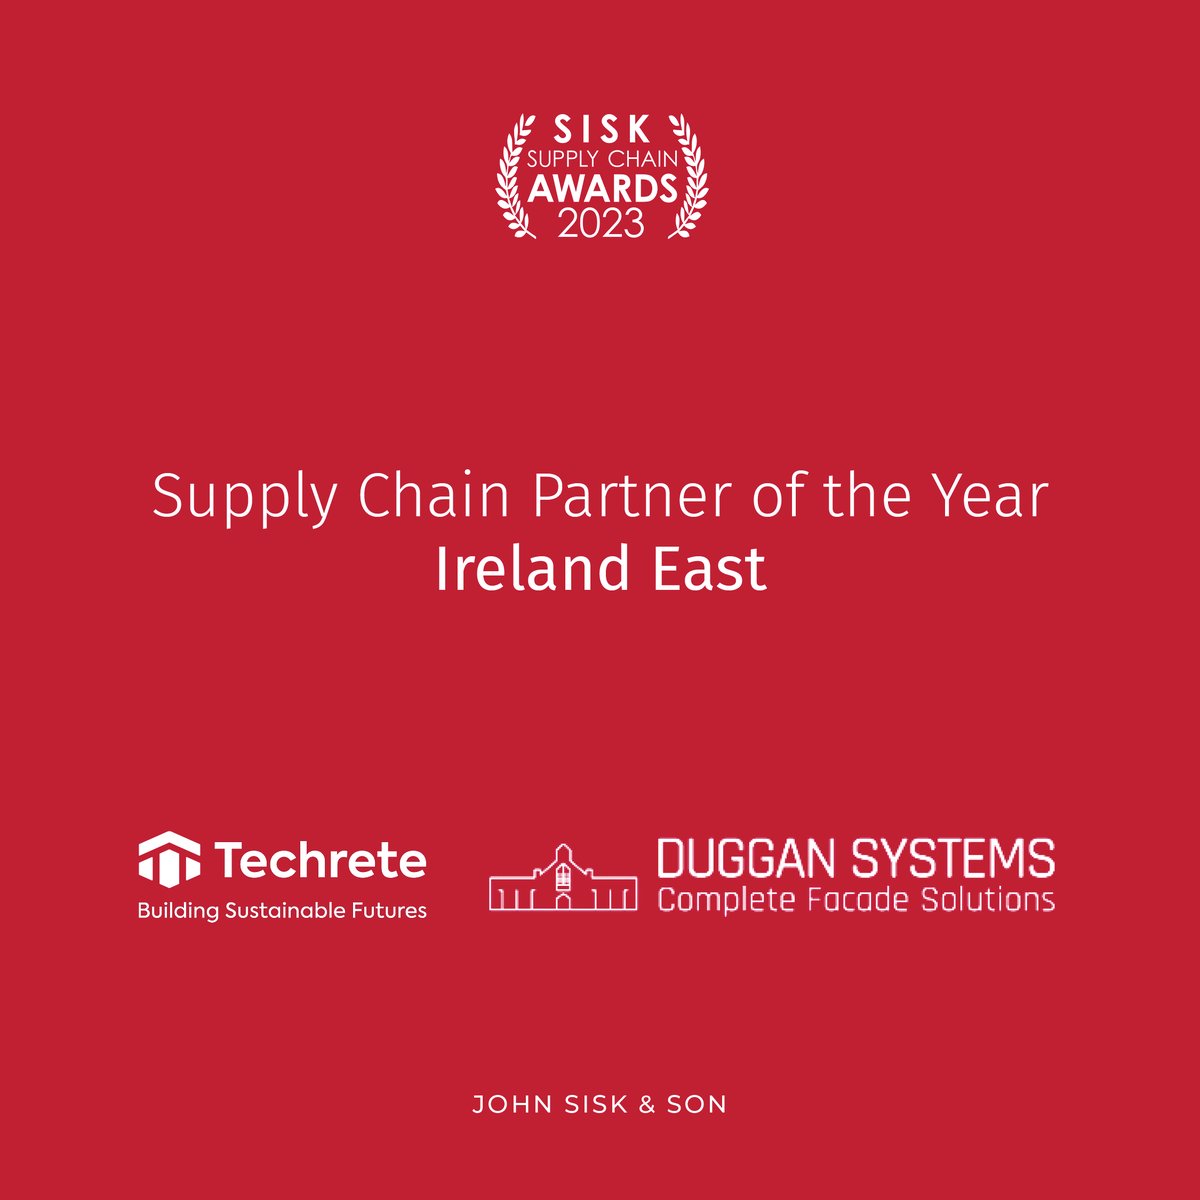 Our final winners of the night are…. @techrete and Duggan Systems Joint Venture winners in the ‘Supply Chain Partner of the Year – Ireland East!’ category. Congrats to both teams! #BuiltBySisk